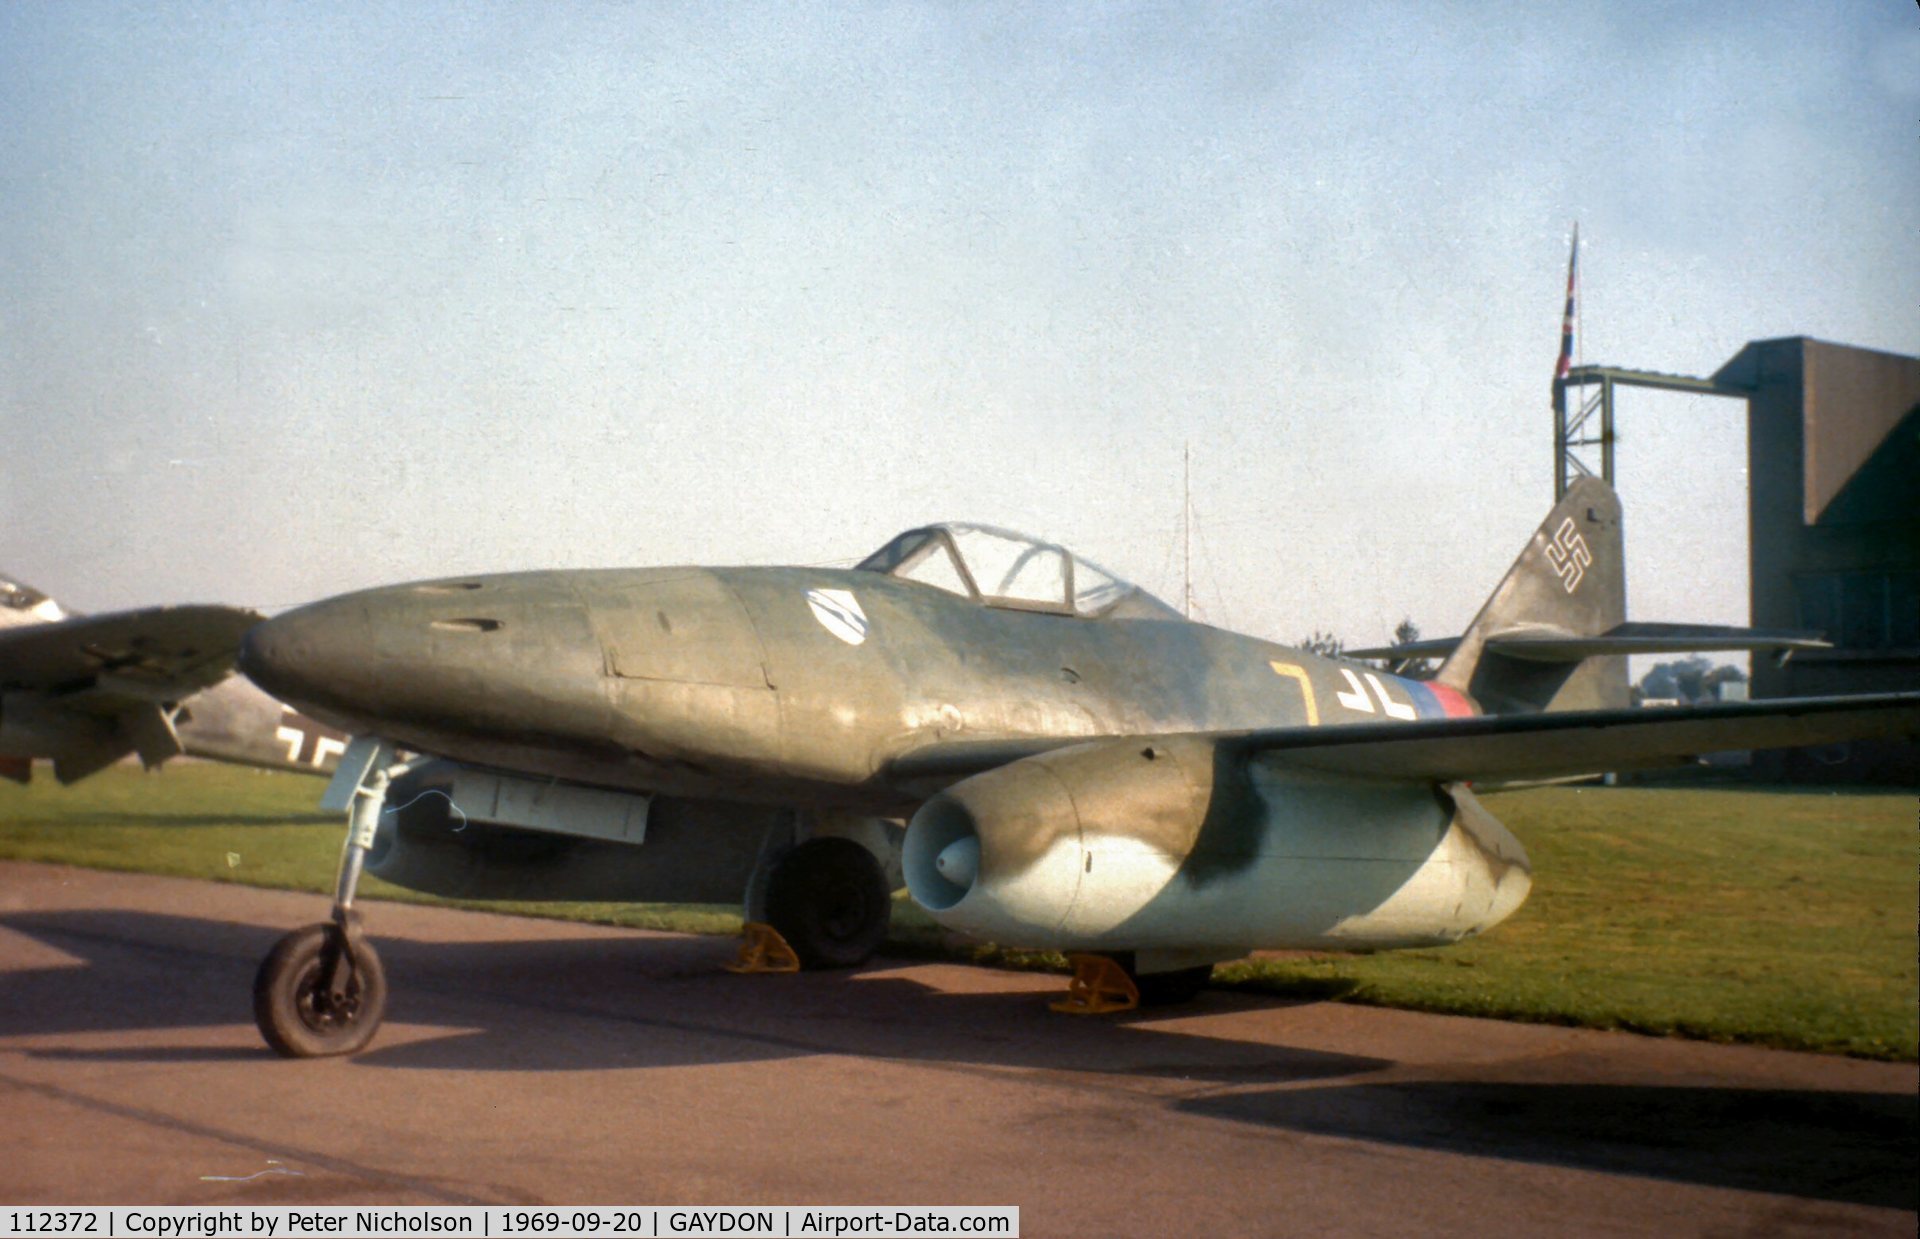 112372, Messerschmitt Me-262A-2a Schwalbe C/N 112372, Me-262 on display at the 1969 Battle of Britain Airshow at RAF Gaydon.